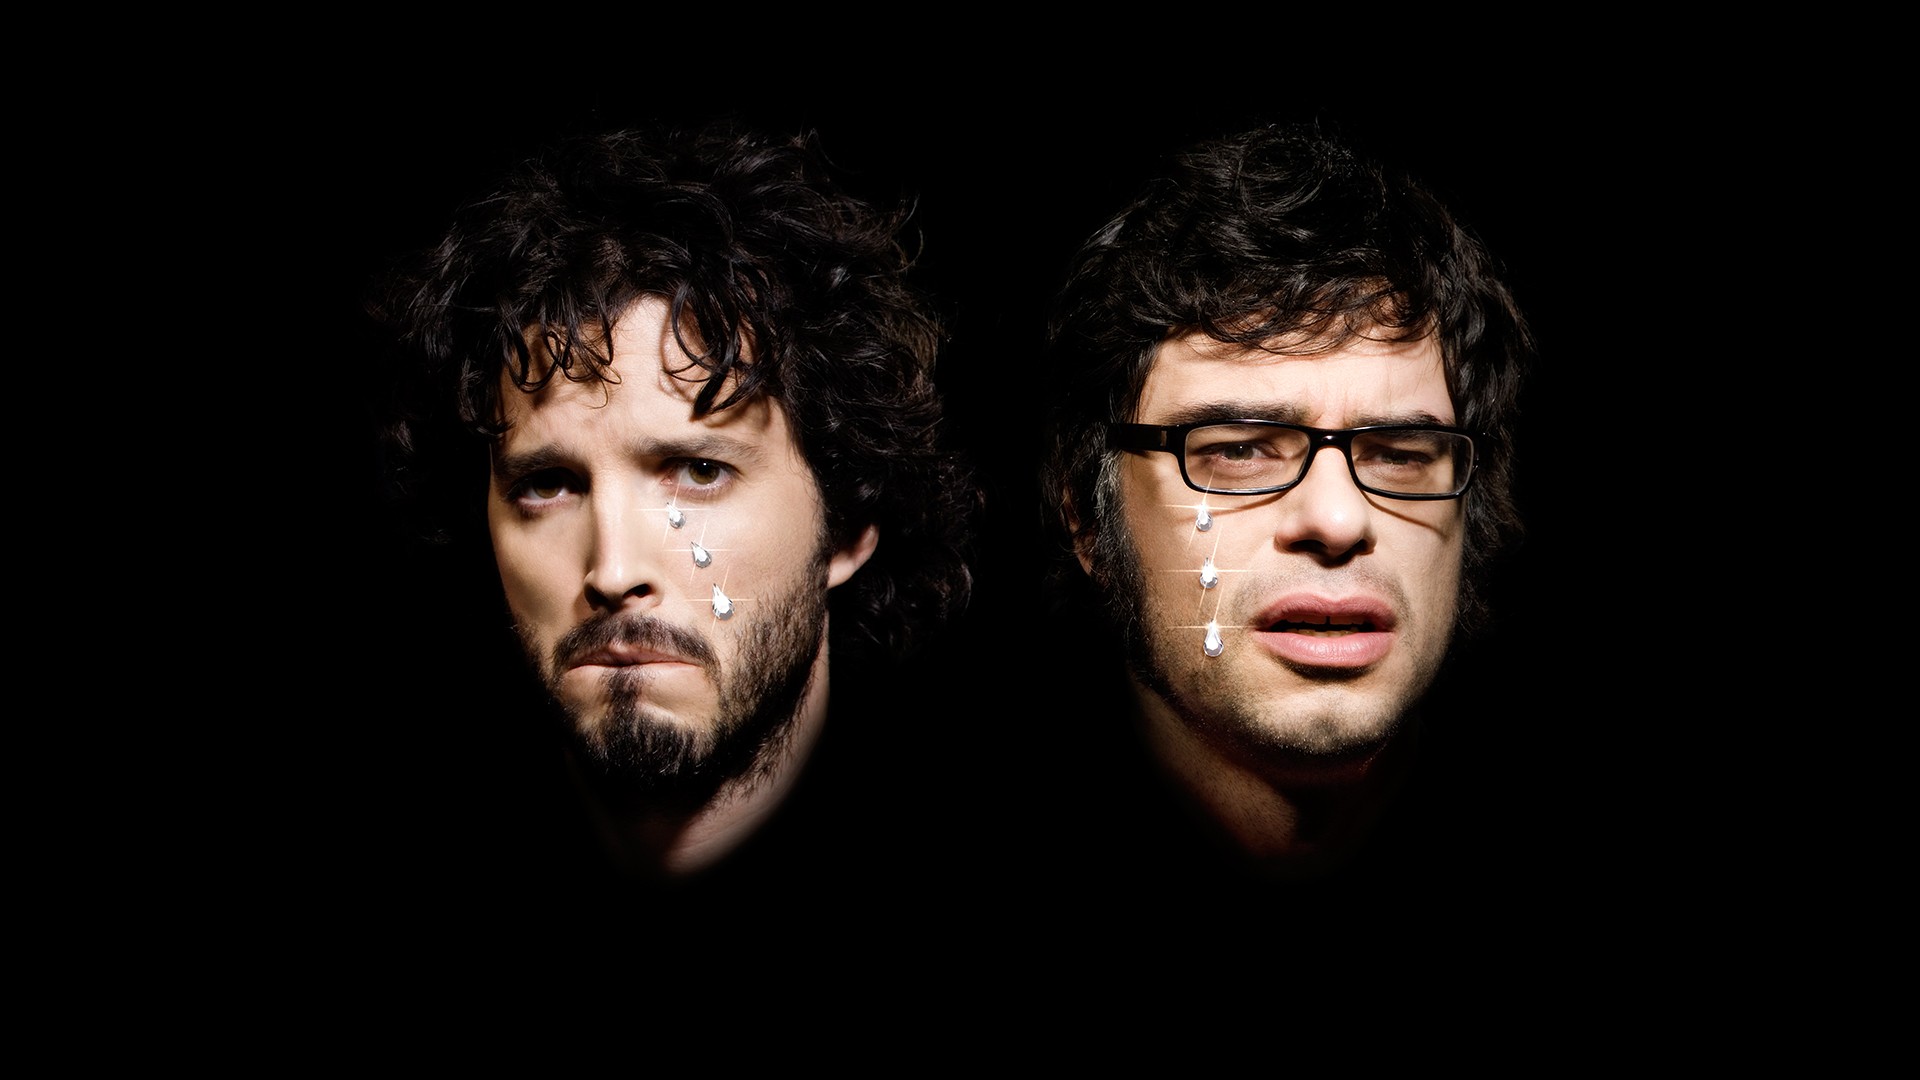 Flight of the Conchords background